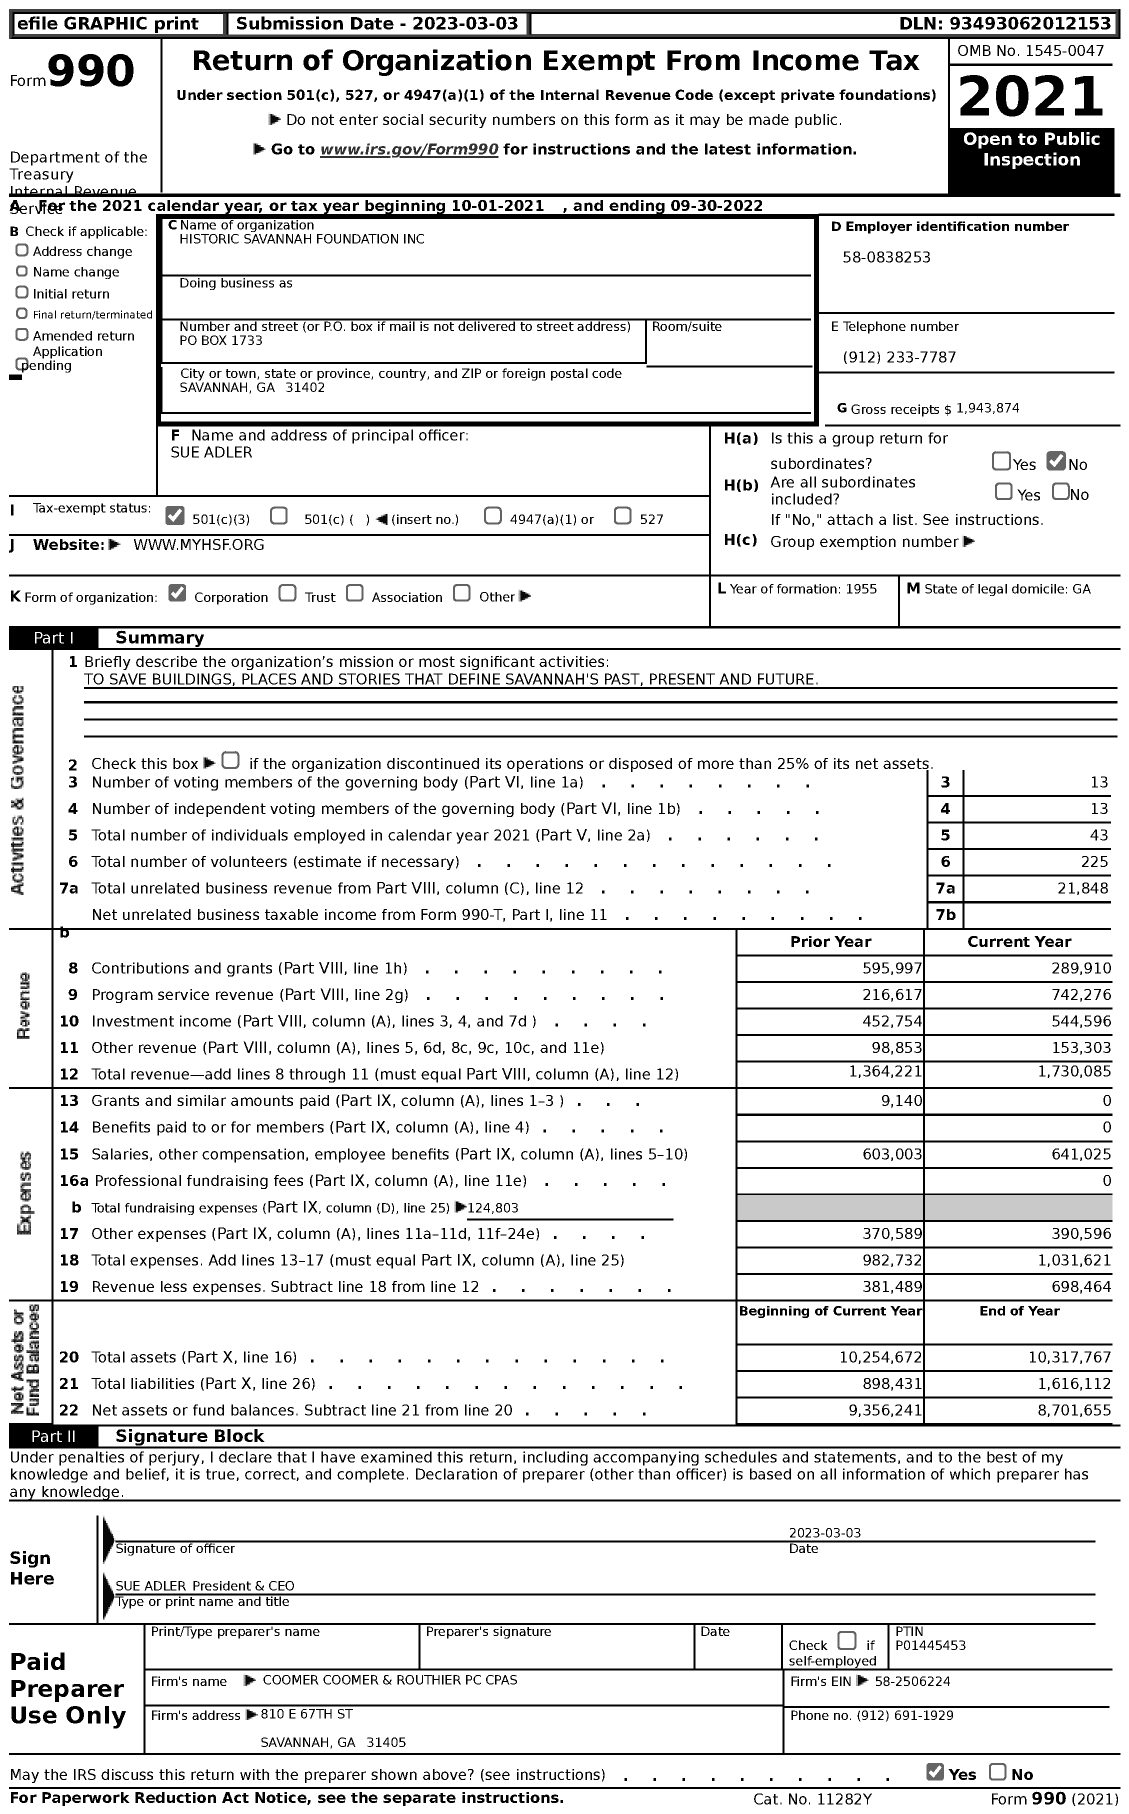 Image of first page of 2021 Form 990 for Historic Savannah Foundation (HSF)